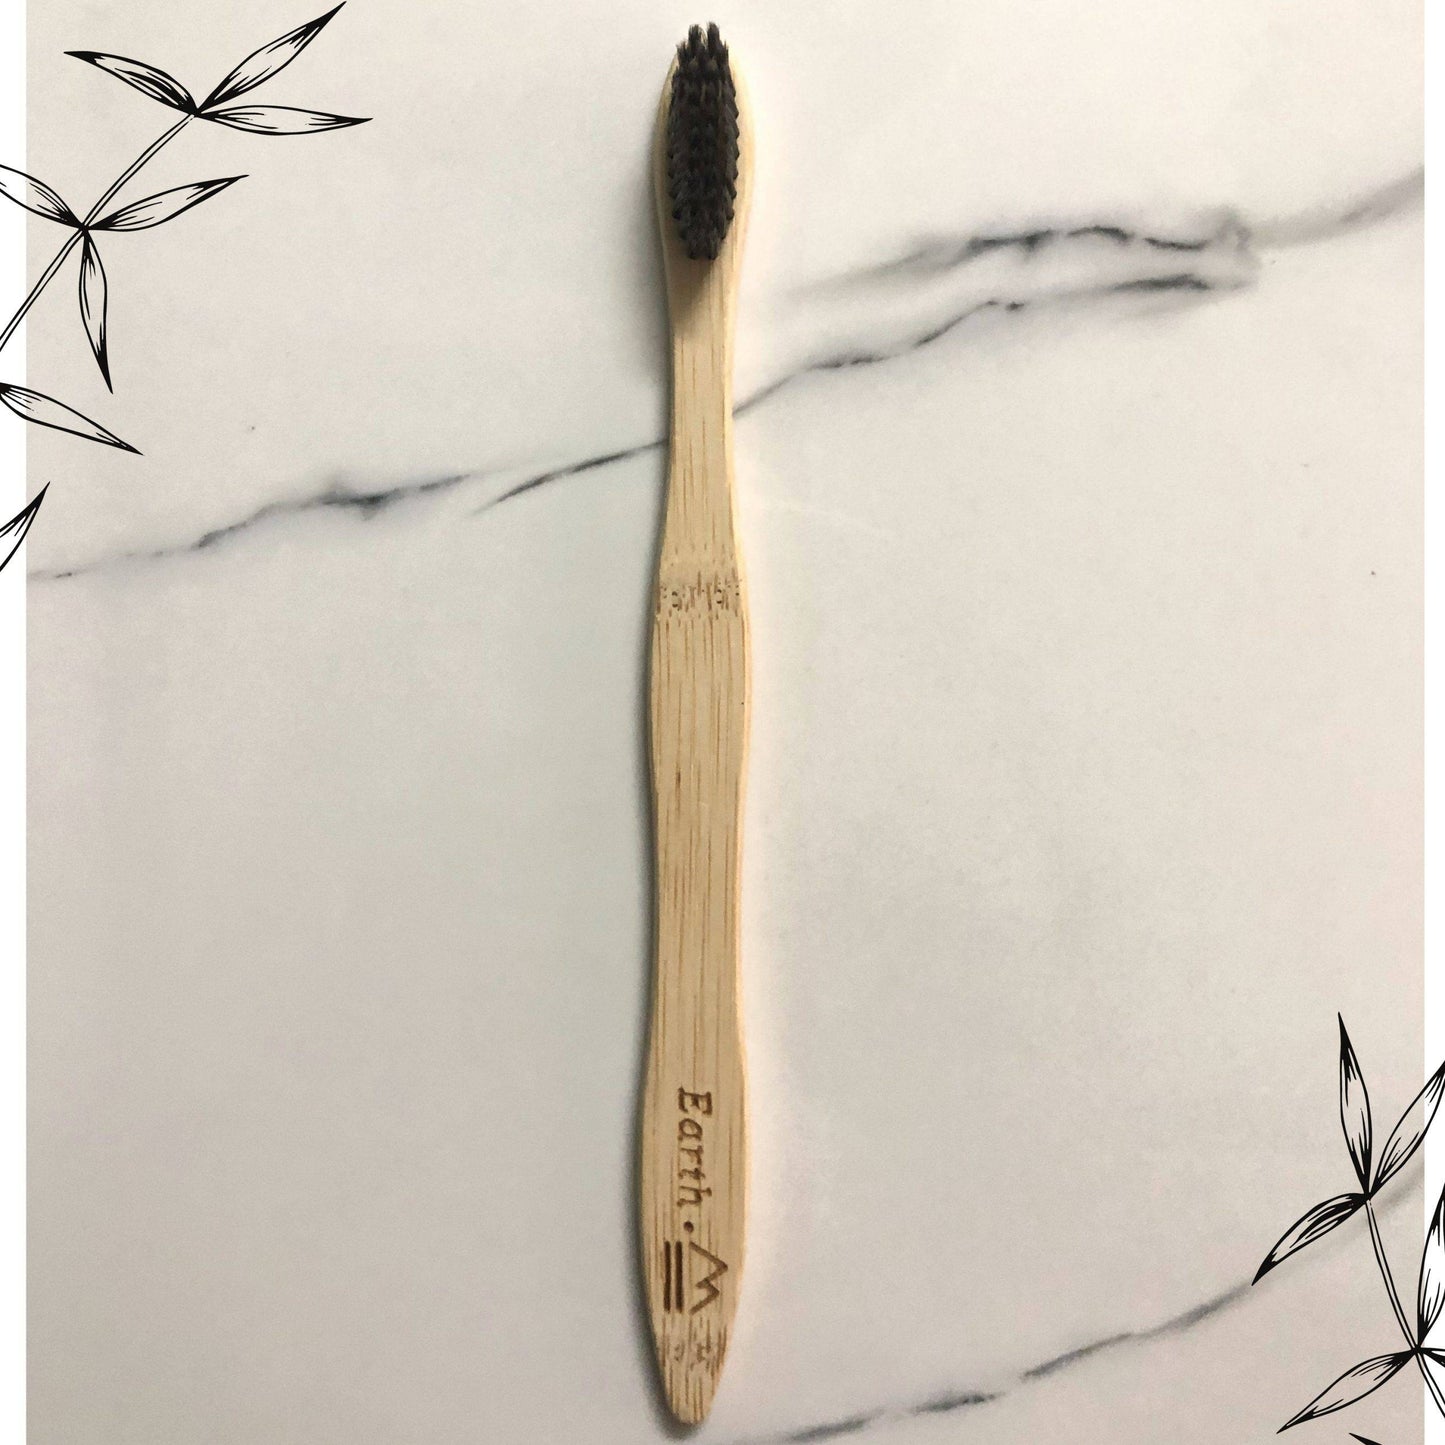 100% Biodegradable Bamboo Toothbrush with Soft Charcoal-activated Bristles - For Adults